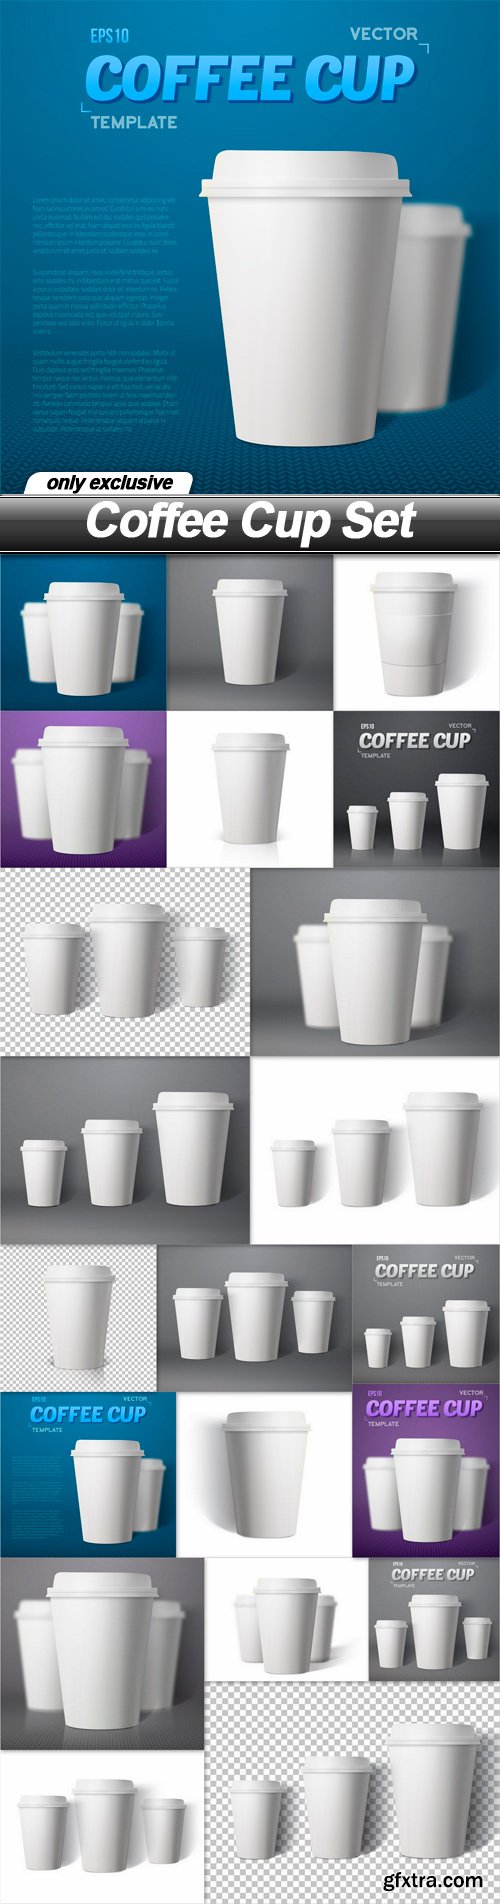 Coffee Cup Set - 21 EPS